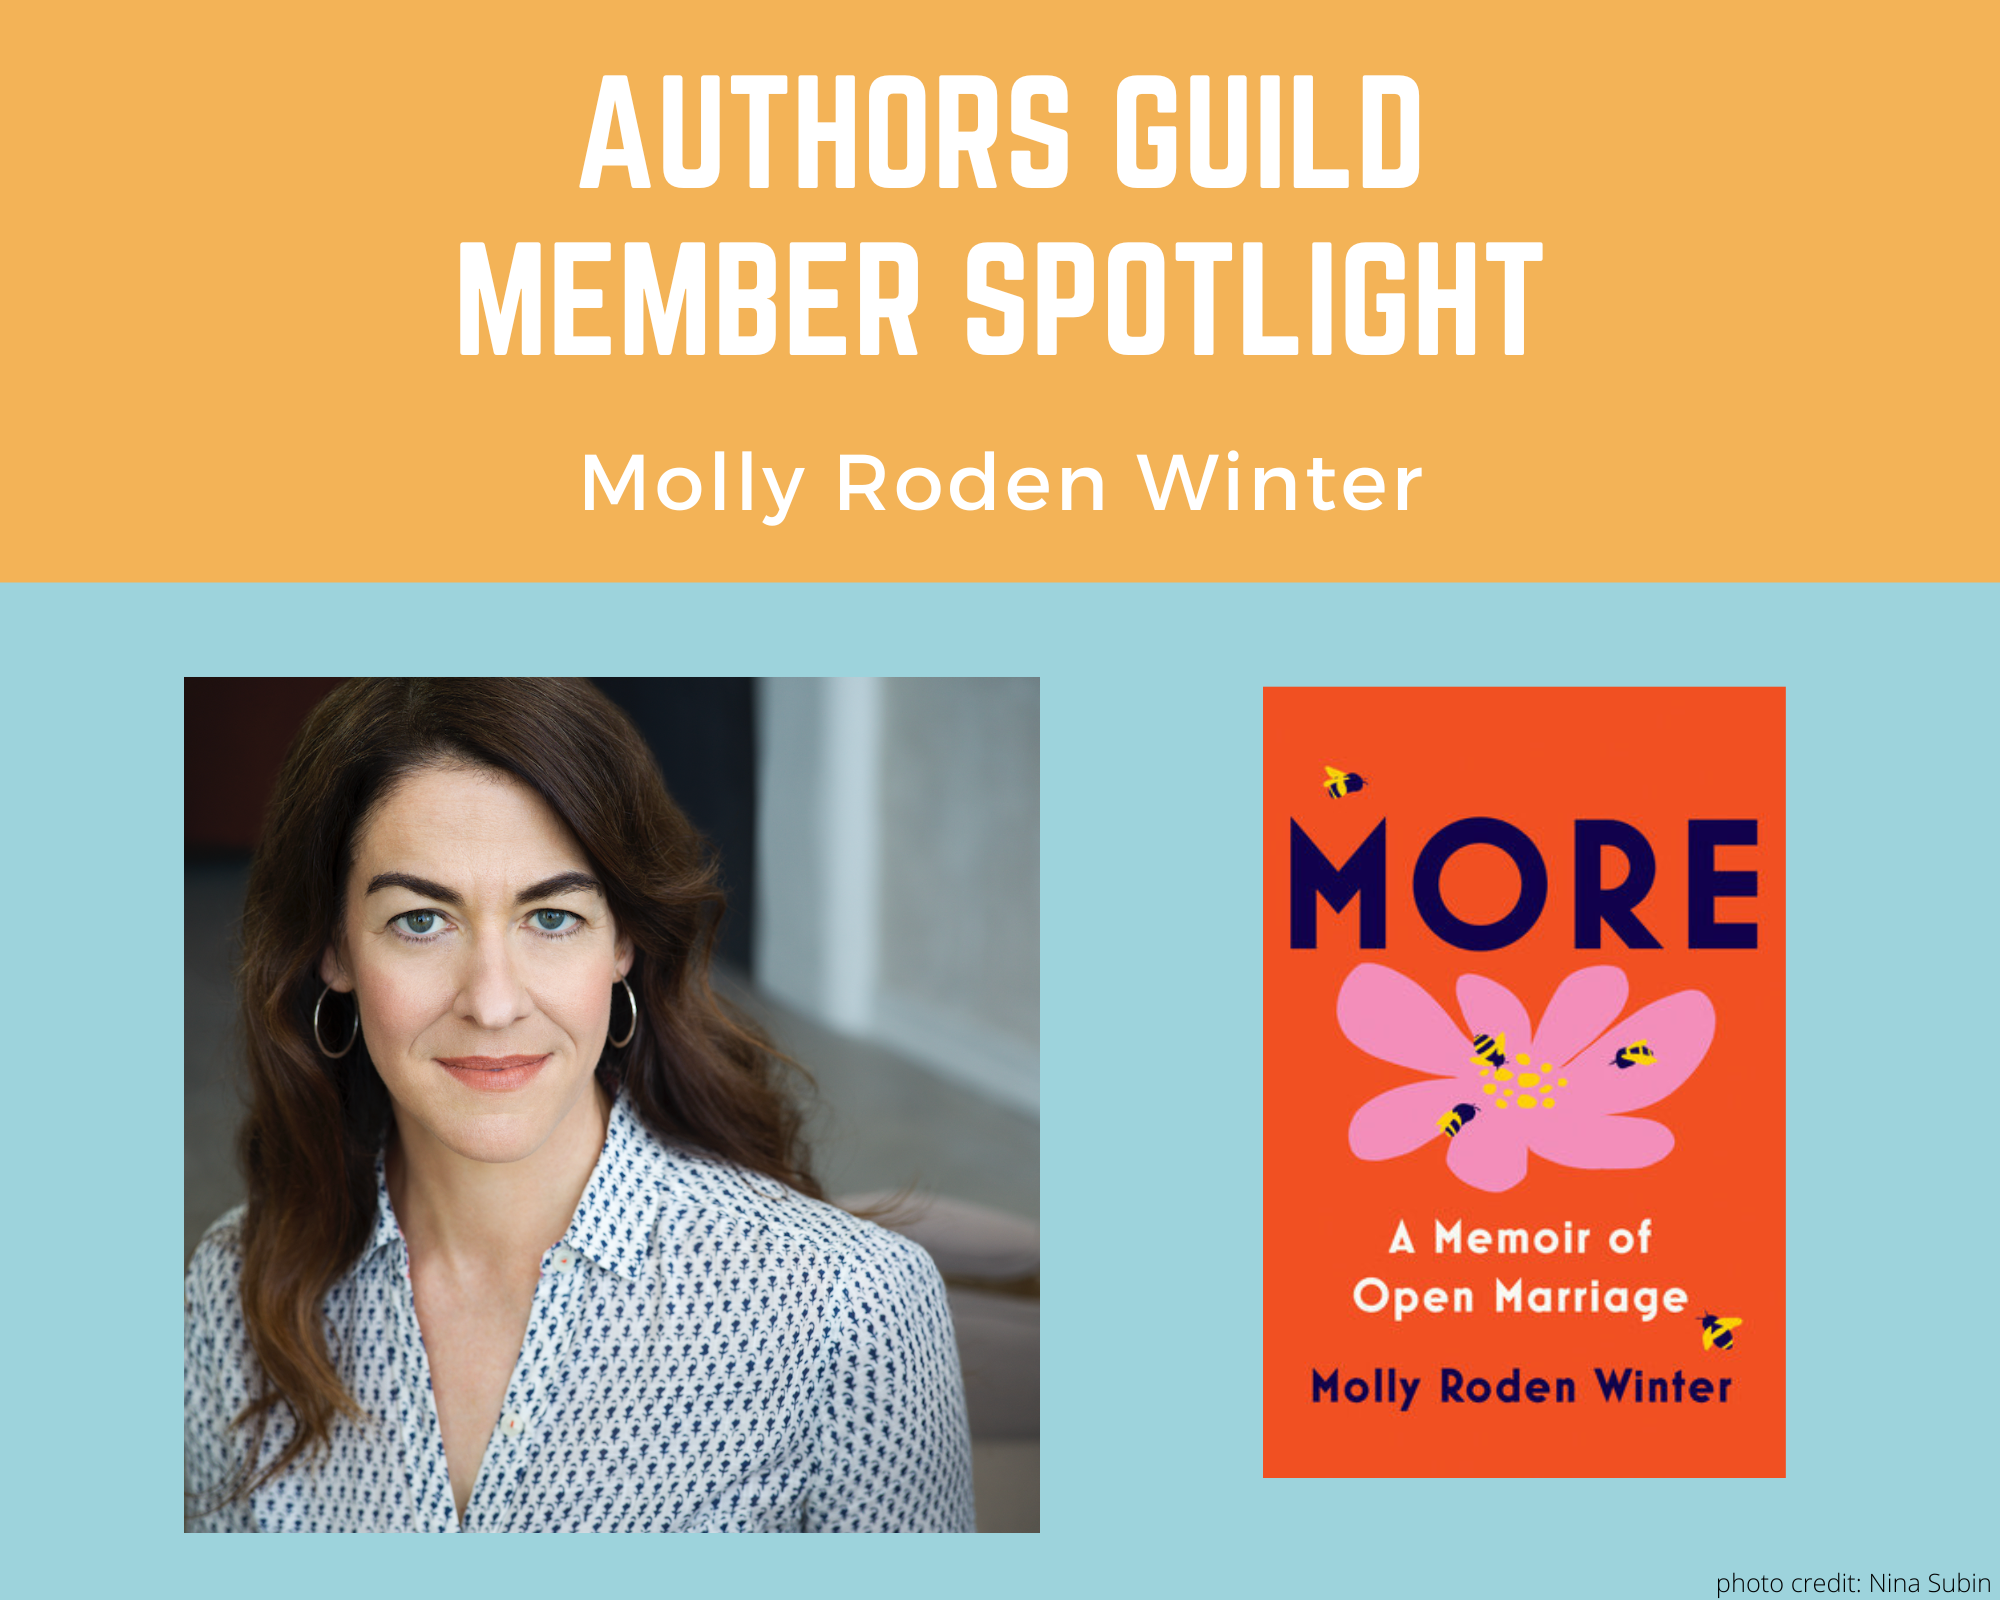 author Molly Roden Winter and an image of her book More